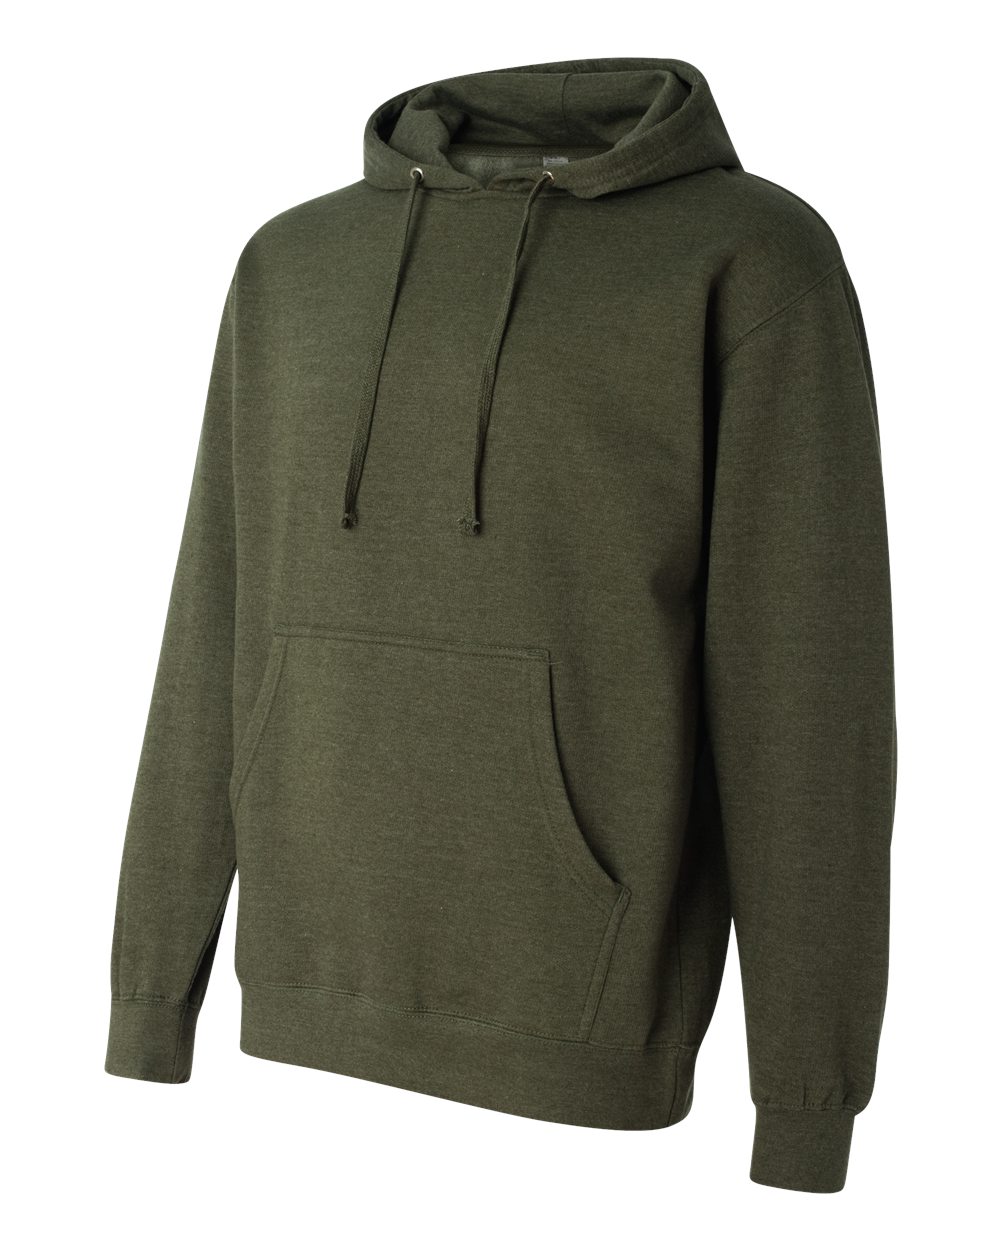 Independent Trading Co SS4500 - Midweight Hooded Sweatshirt